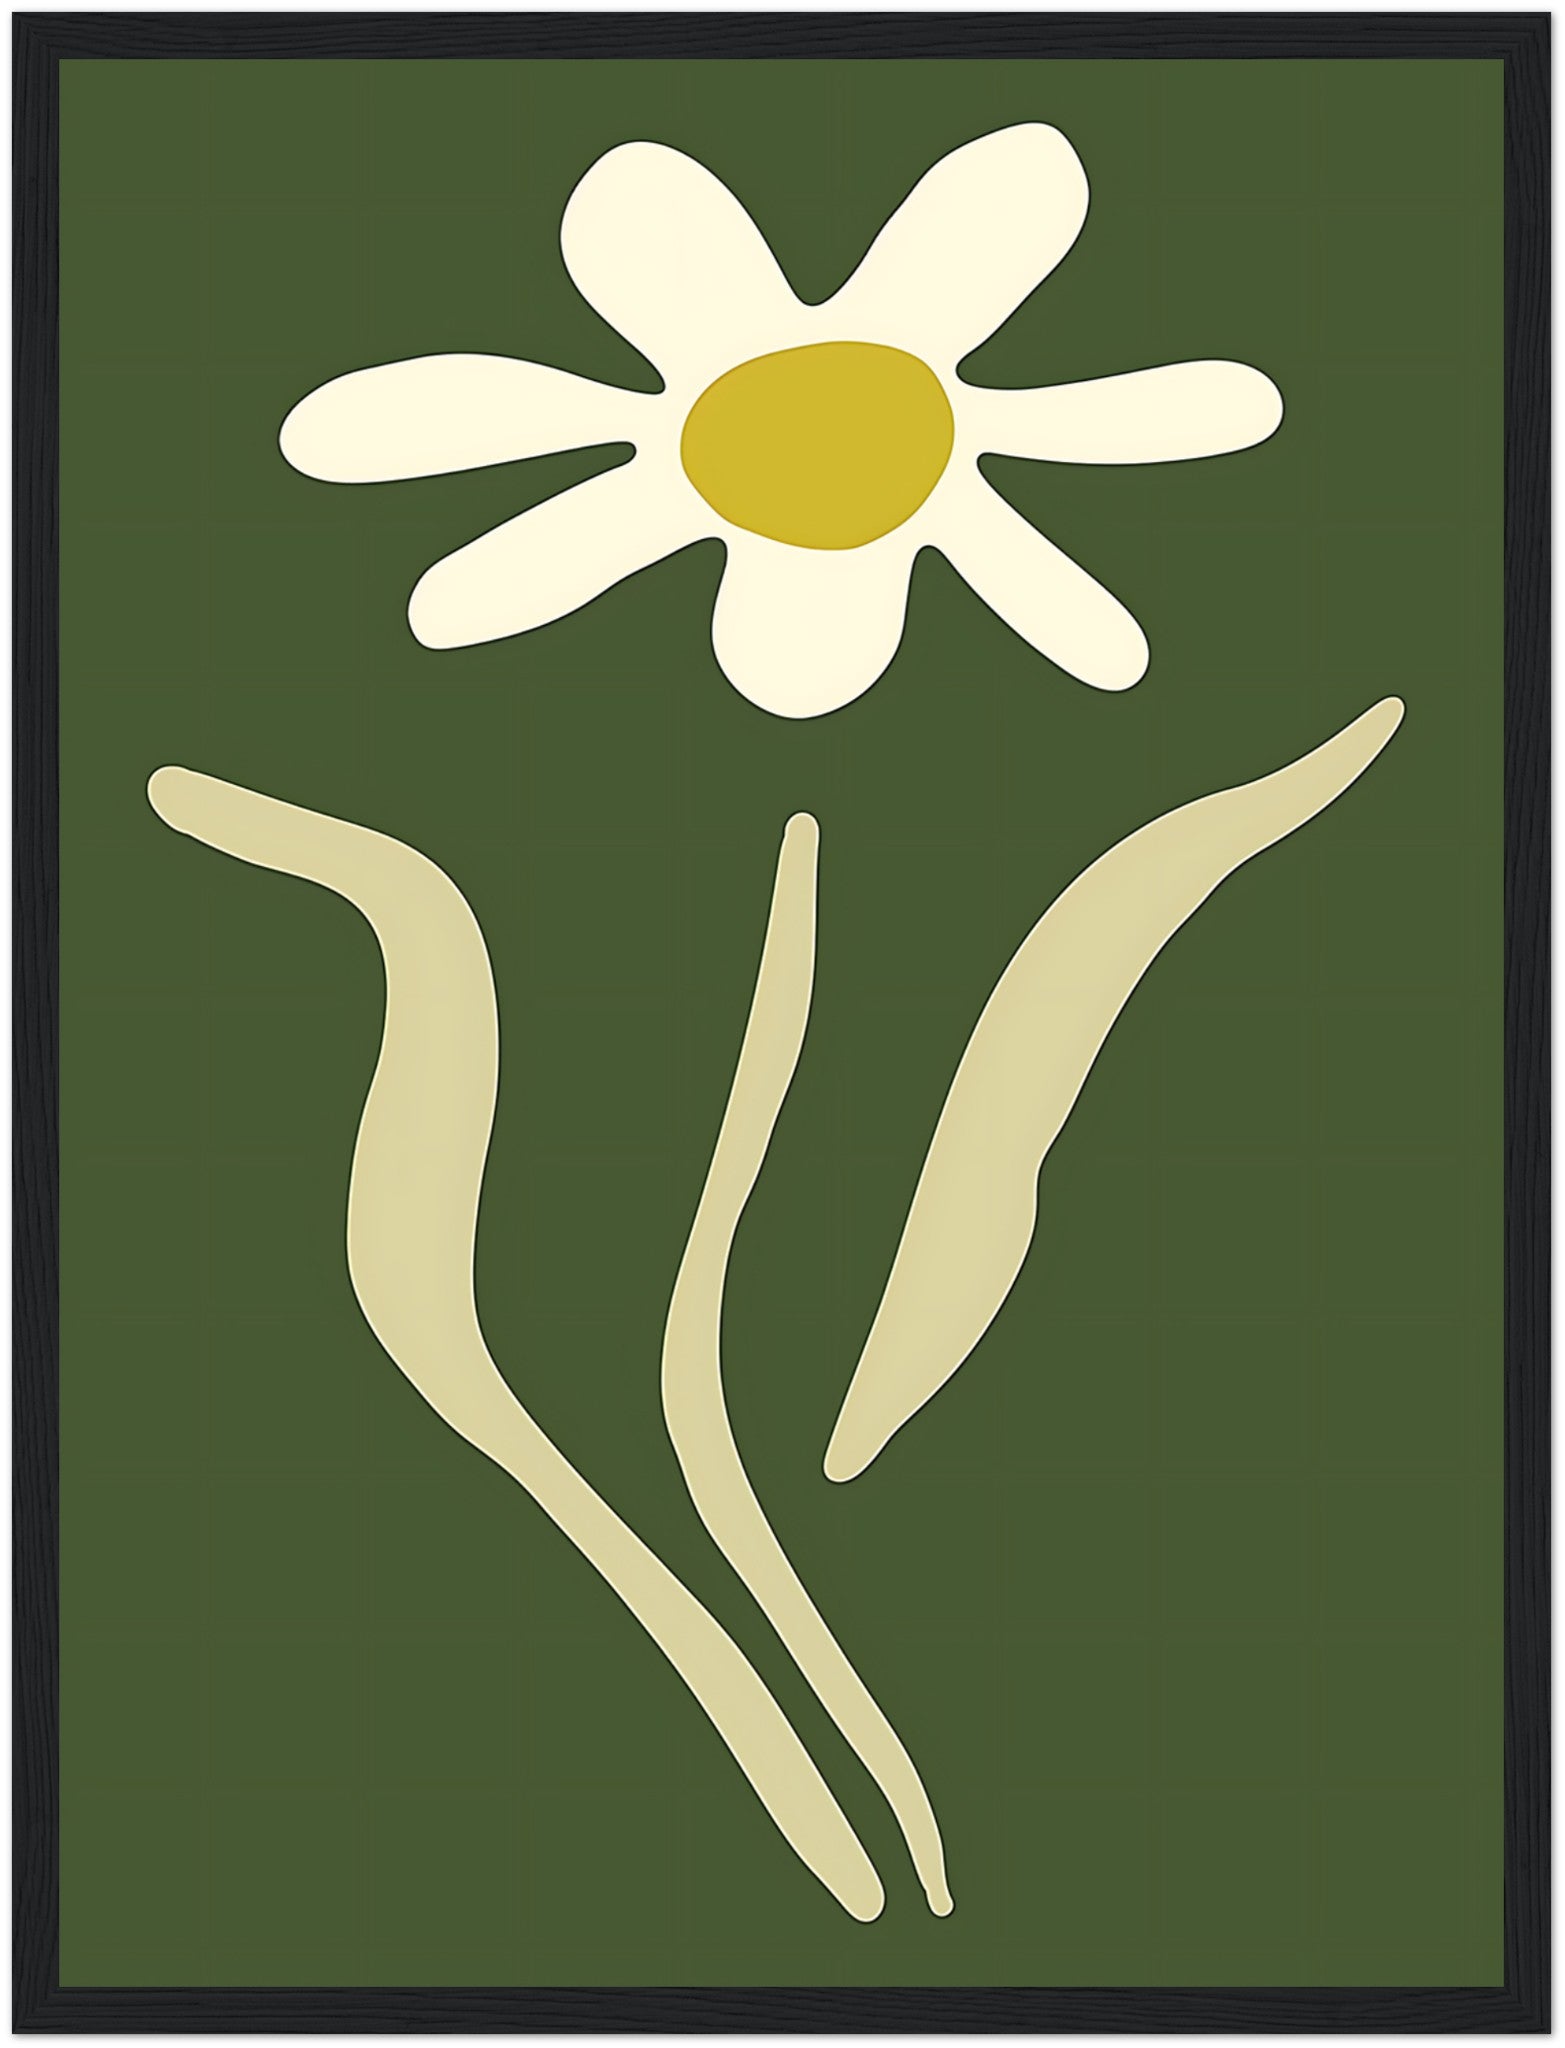 A stylized image of a white daisy with a yellow center on a green background, framed with a brown border.